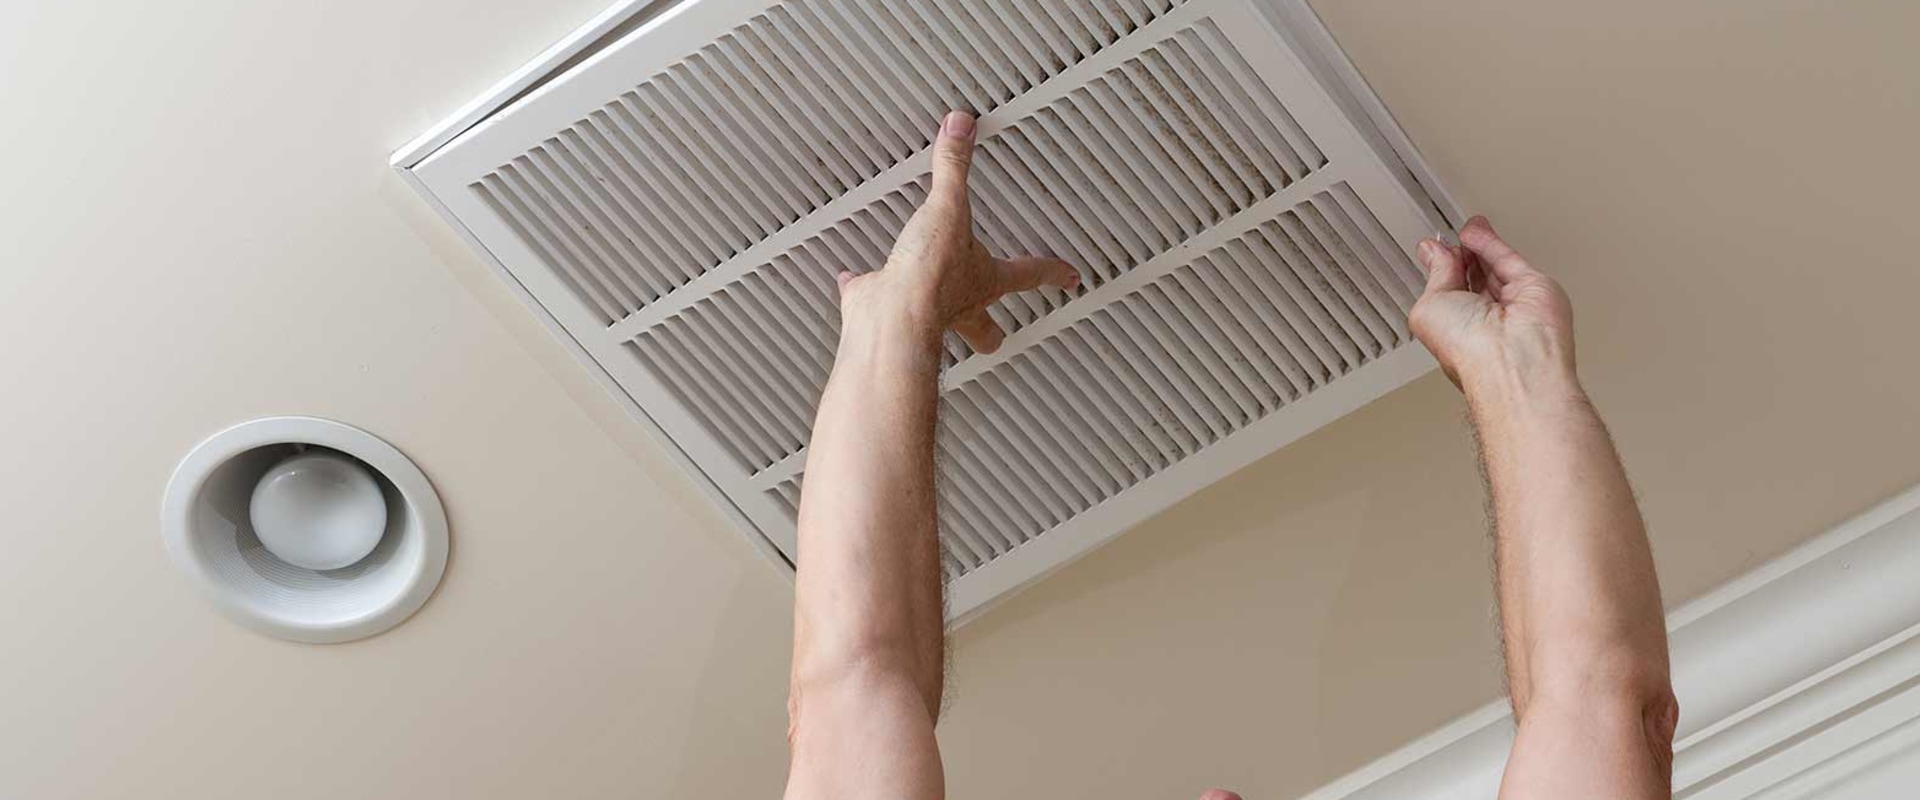 Do Cleaning AC Filters Make a Difference?